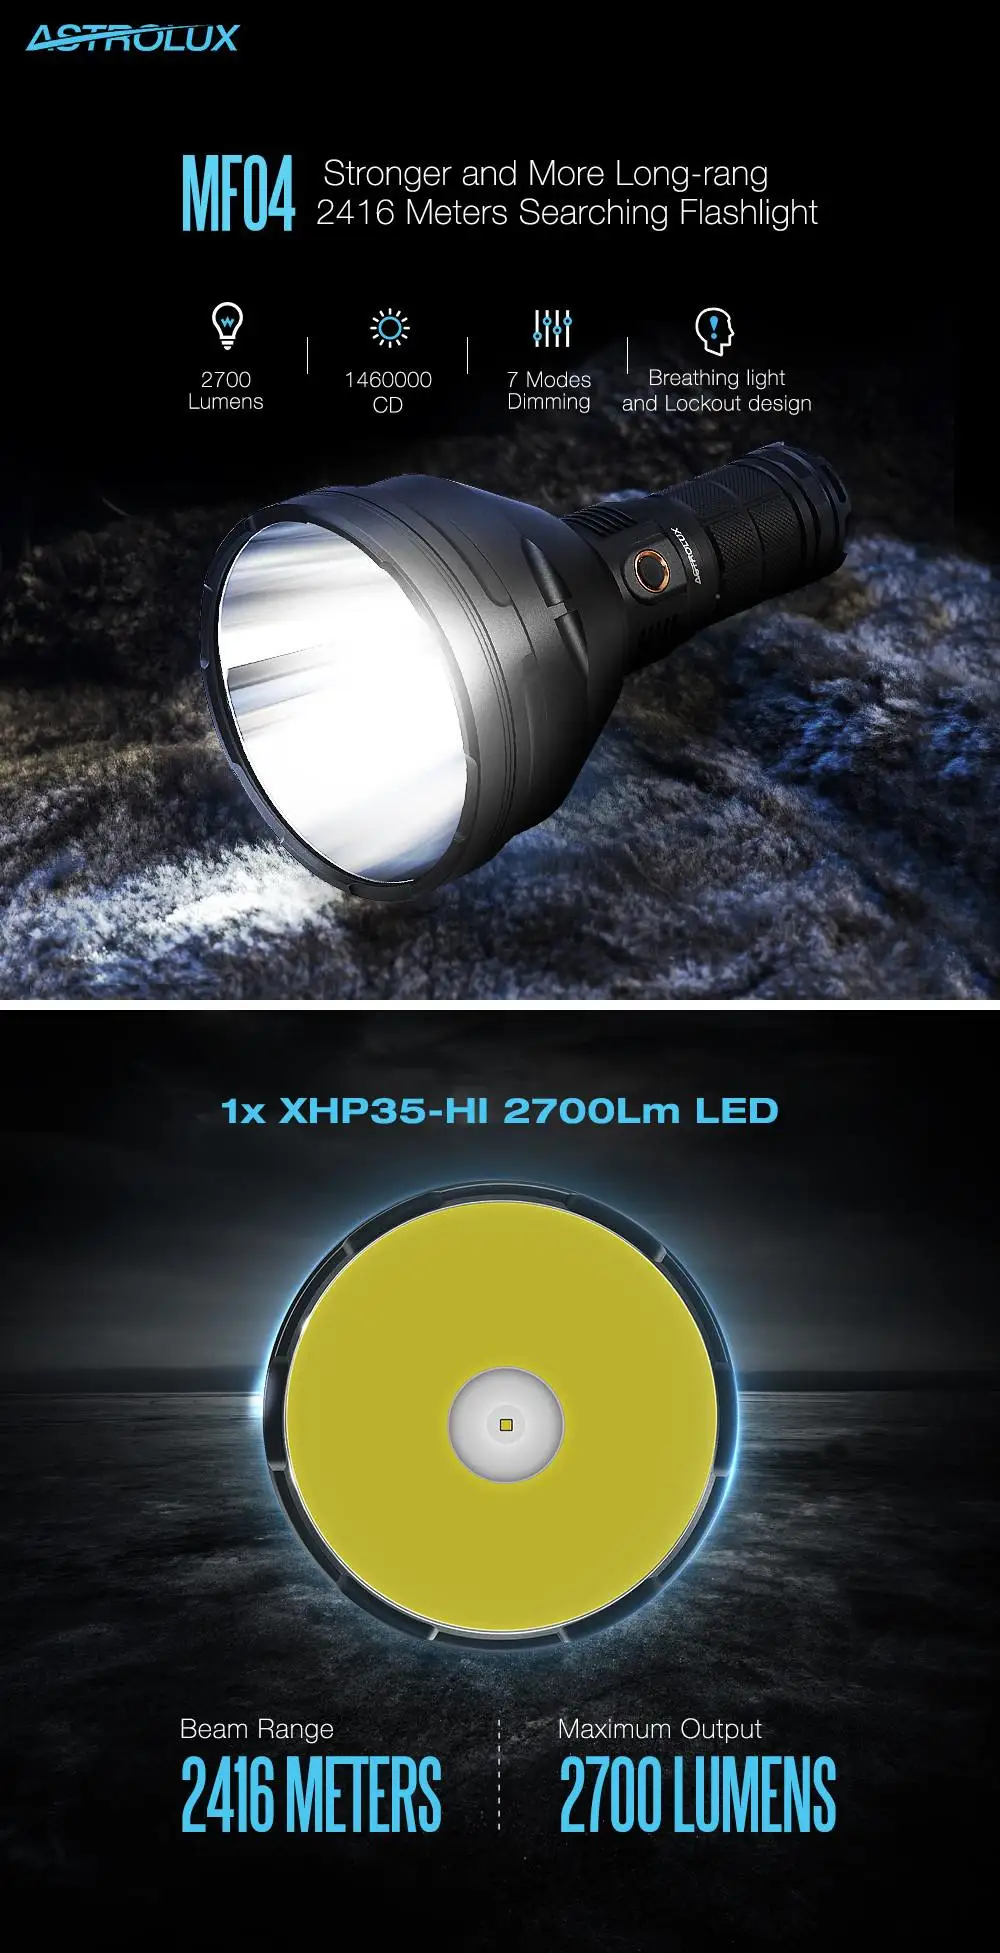 Astrolux MF04 XHP35-HI CW 2700LM 7 Modes Dimming Searching LED Flashligh Torch 